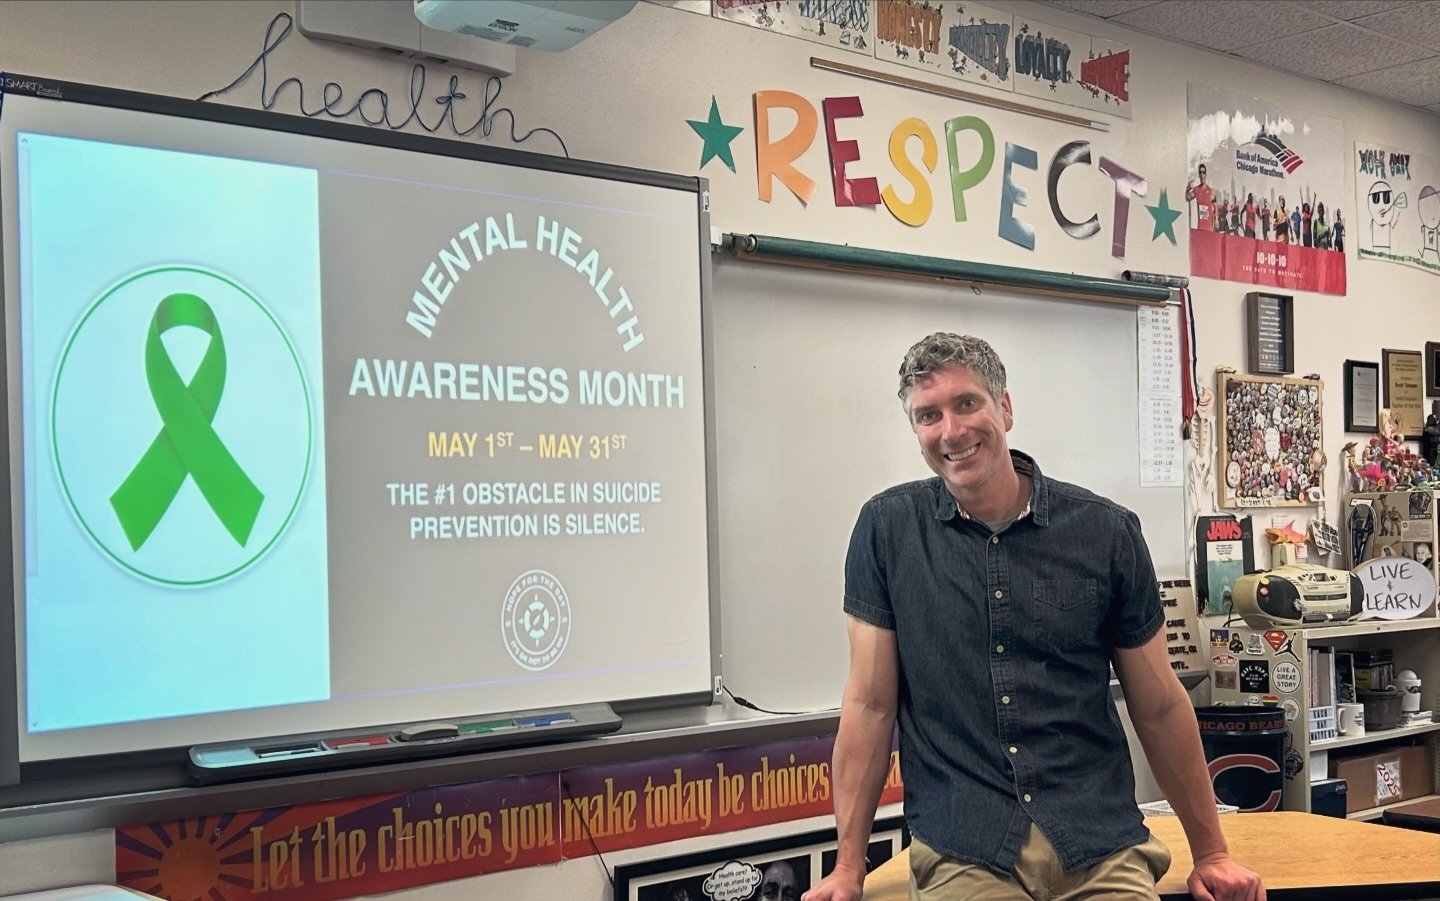 May is Mental Health Awareness Month! 💚 Classroom activities are always working to fight the stigma surrounding mental illness.

📊 STATISTICS:
- At least 25% of Americans will live with a a diagnosable psychiatric disorder in the course of their li